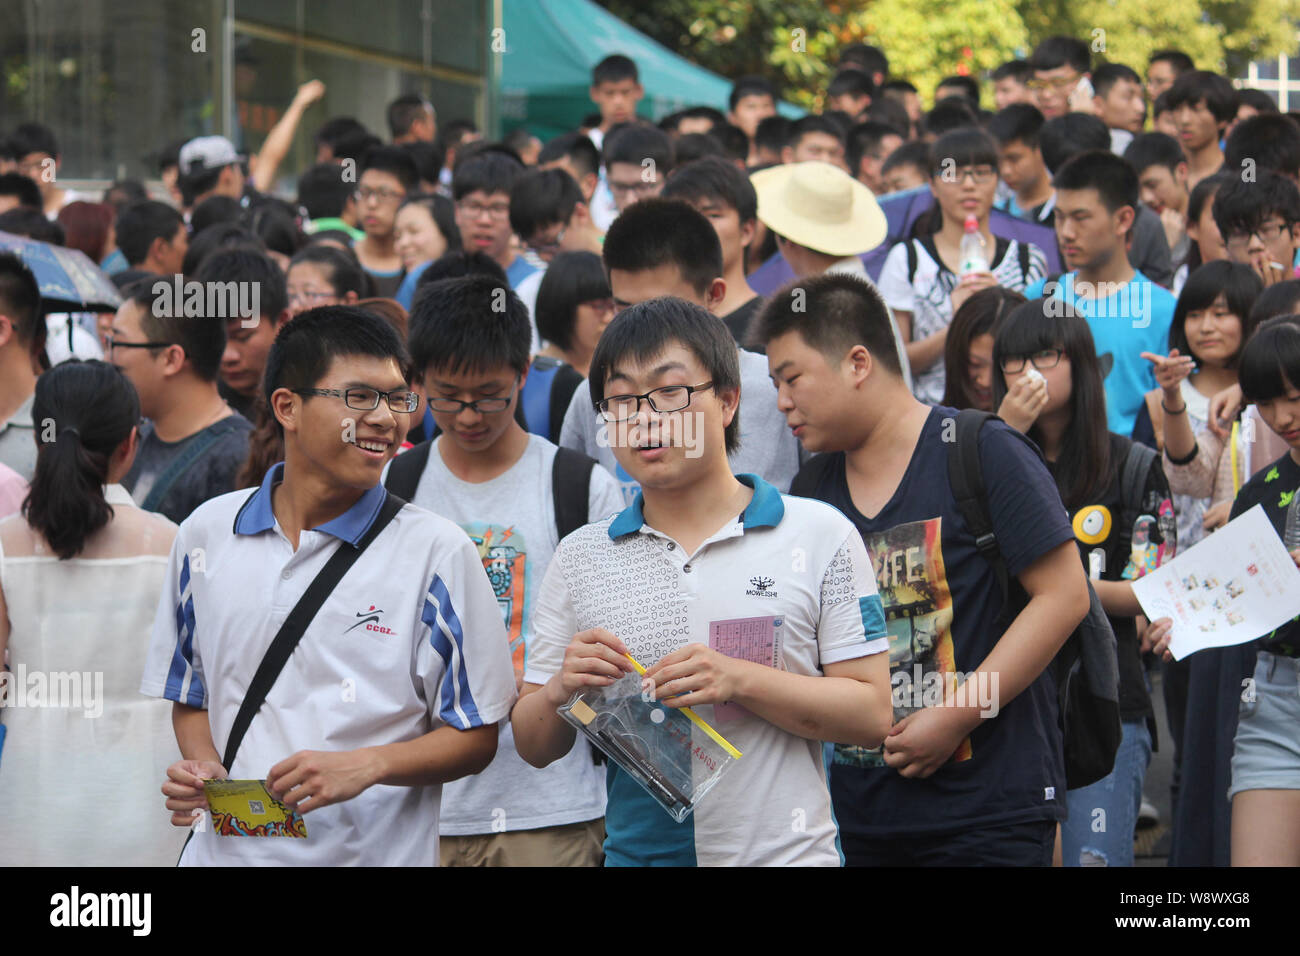 Students leave the campus after finishing the National College Entrance Exam (Gaokao) at a high school in Shiyan city, central Chinas Hubei province, Stock Photo